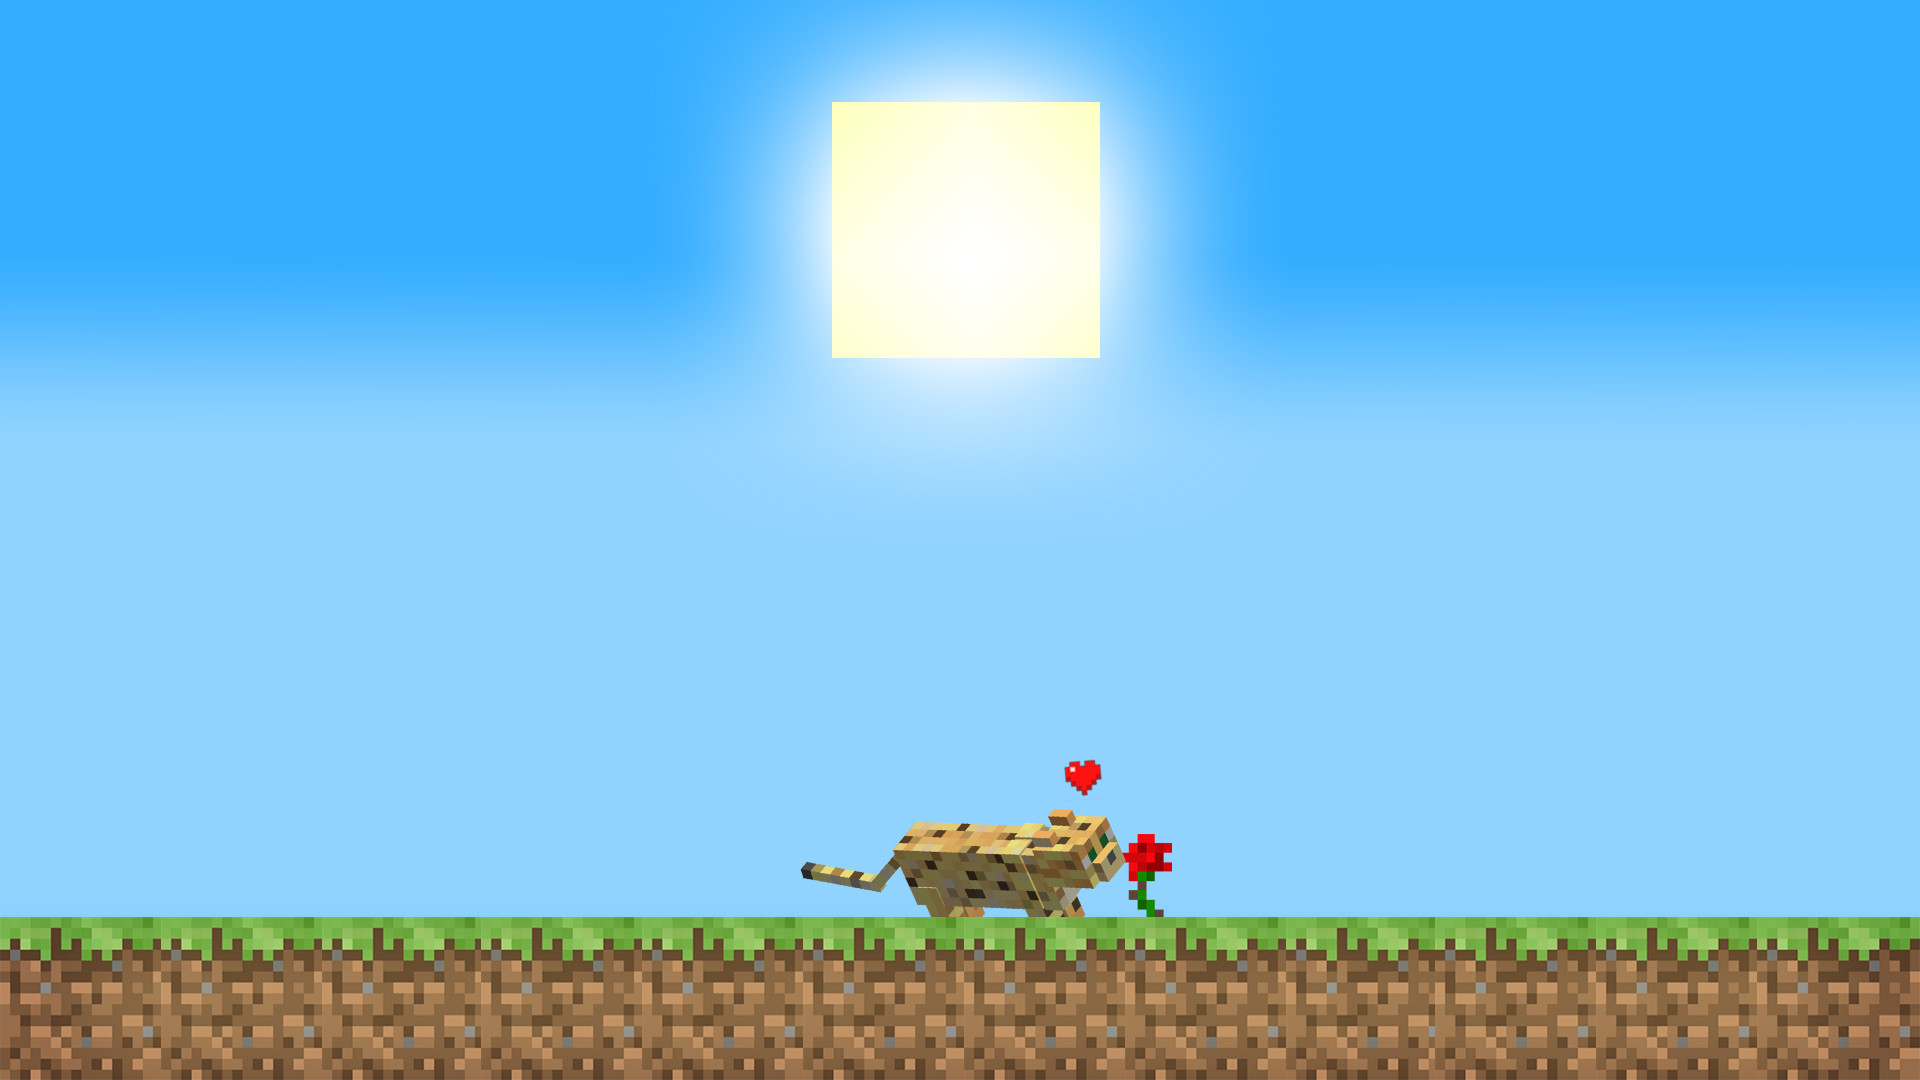 Minecraft Ocelot Wallpaper And Sun In The Background